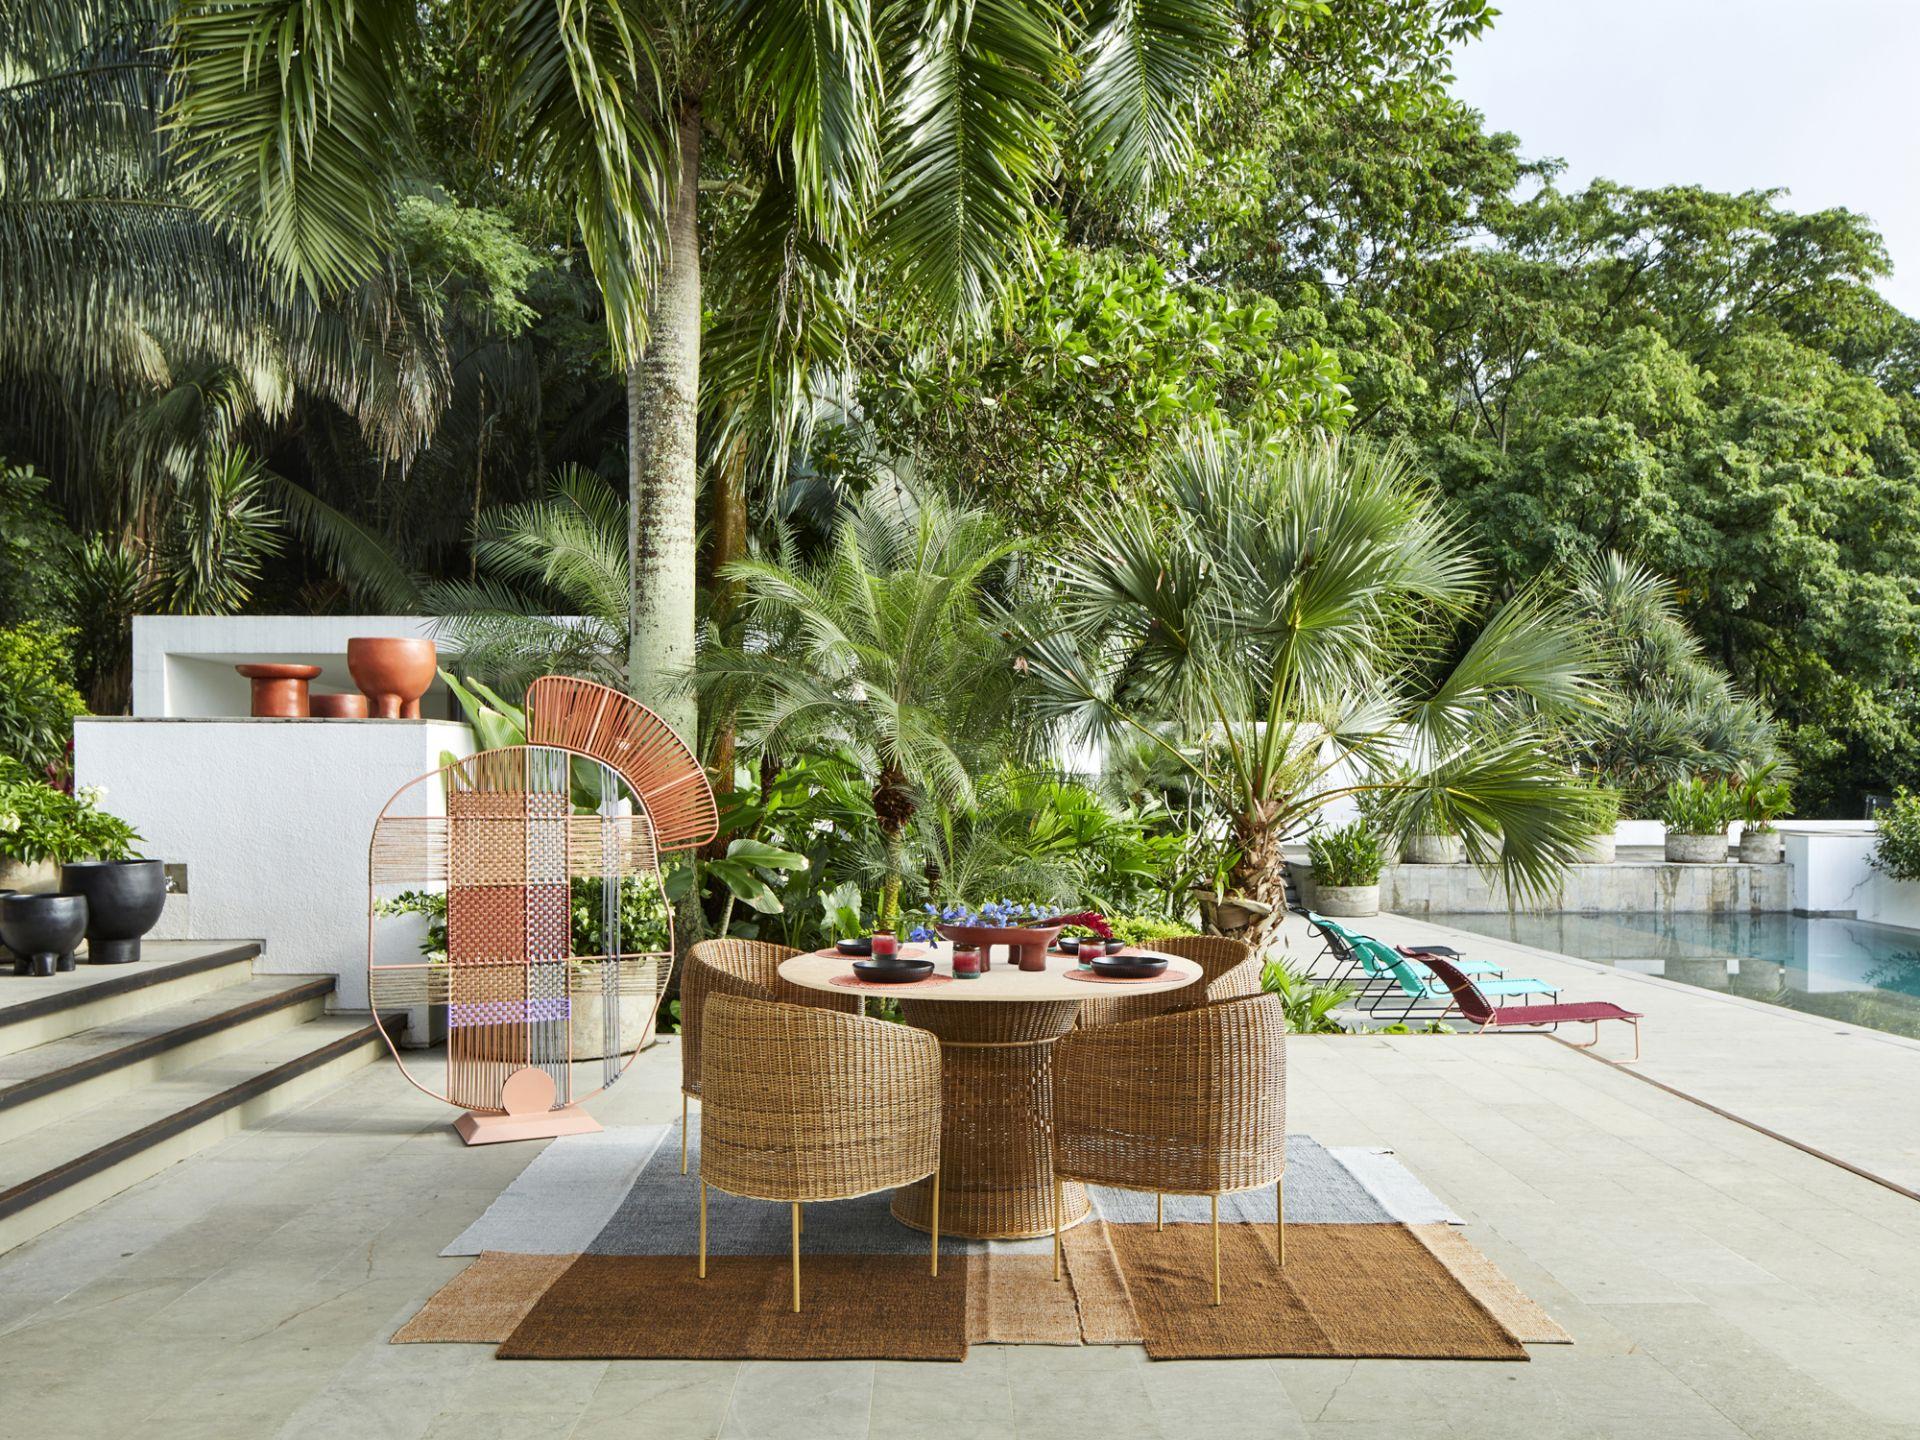 The Caribe Natural Dining Table is a design by Sebastian Herkner, featuring a beautiful wicker webbing. The shape of the table follows our popular Caribe and Caribe Chic pieces, while the beige hue of the natural material gives it a more subtle